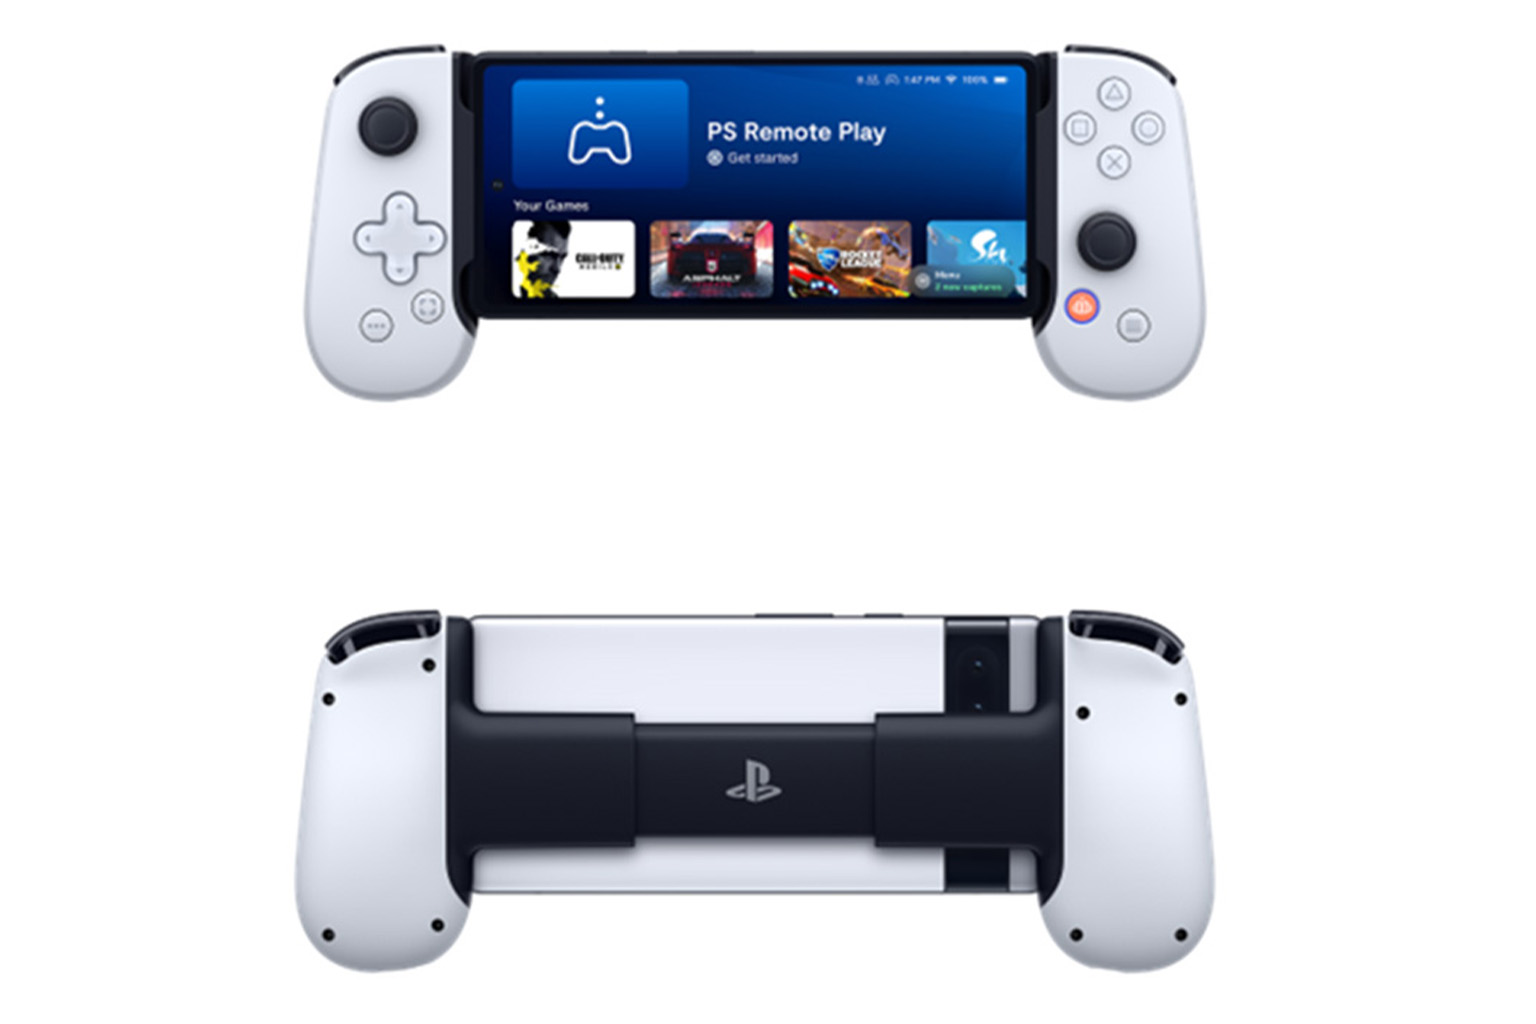 Turn your Android phone into a PS5 controller with this cool accessory | T3